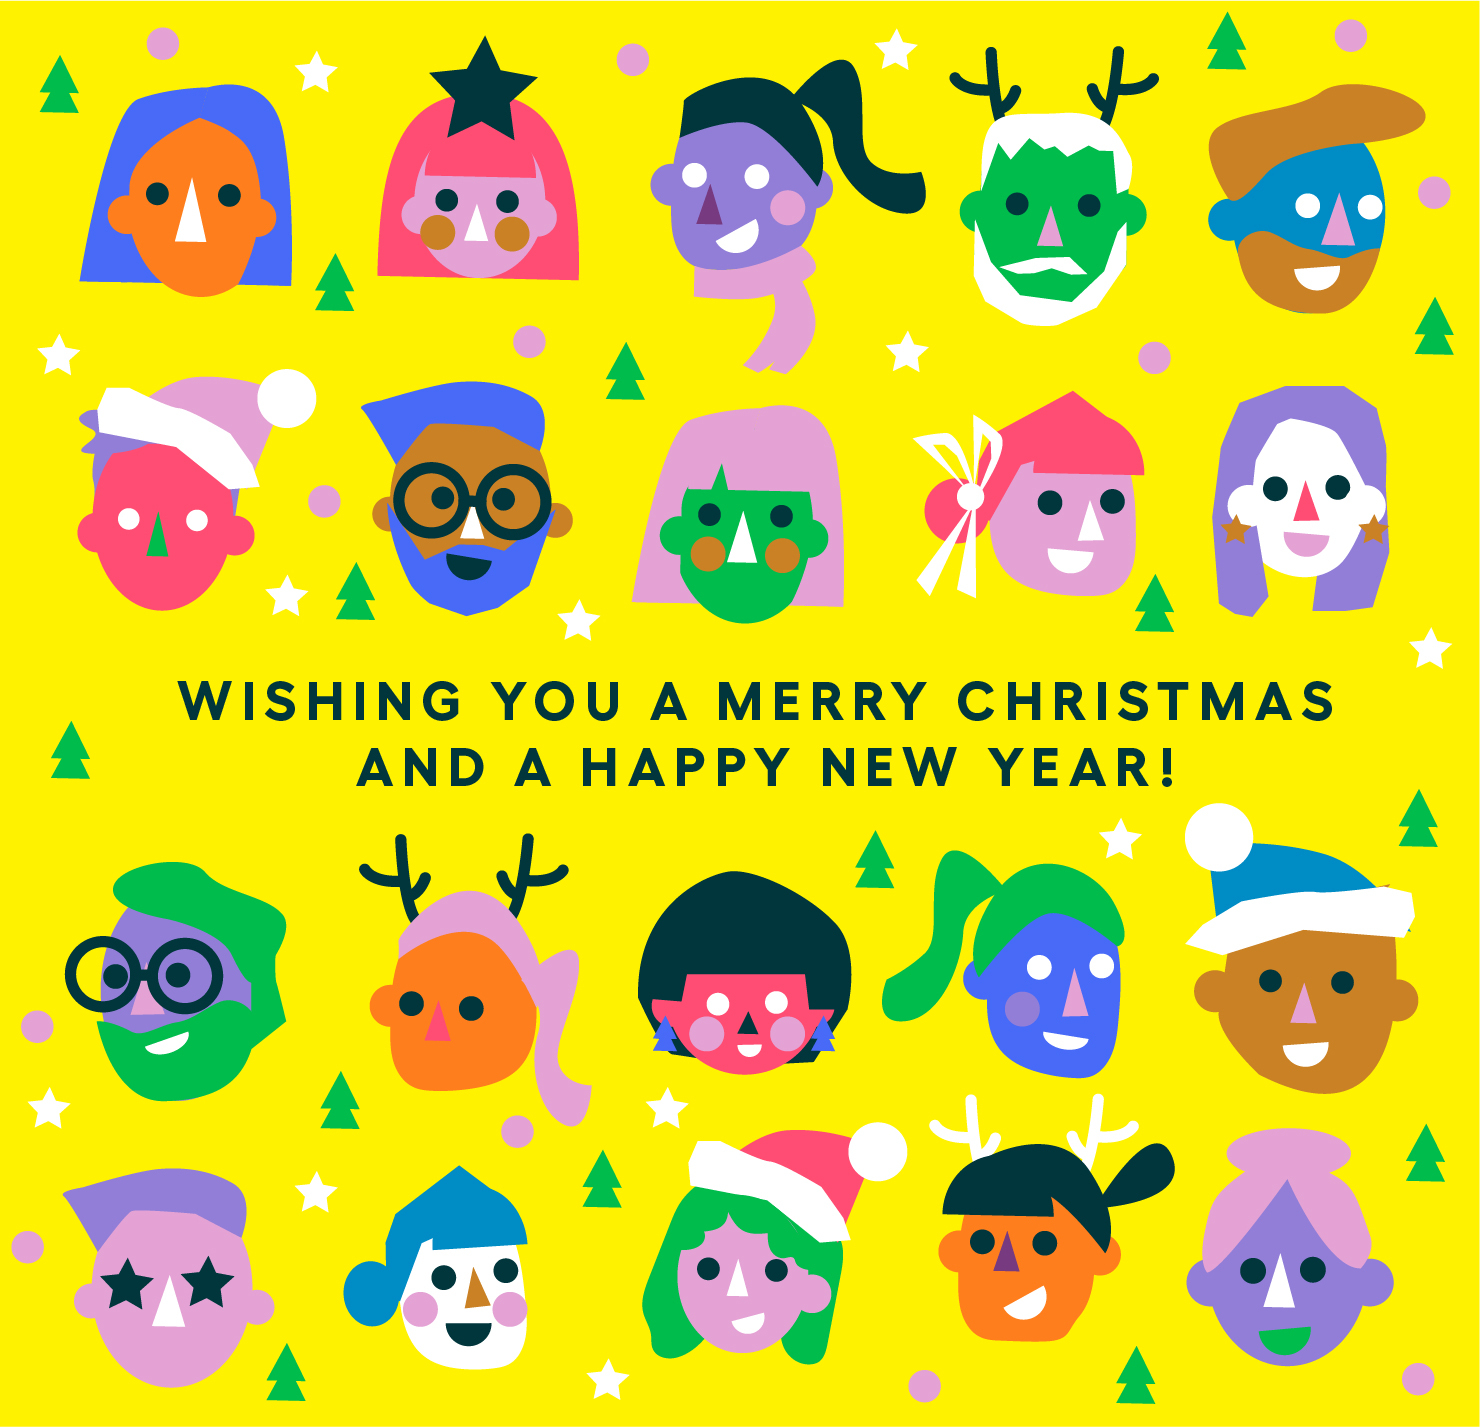 Illustration of 20 cartoon faces representing the employees of Anthologie. Text: Wishing you a merry Christmas and a happy new year!